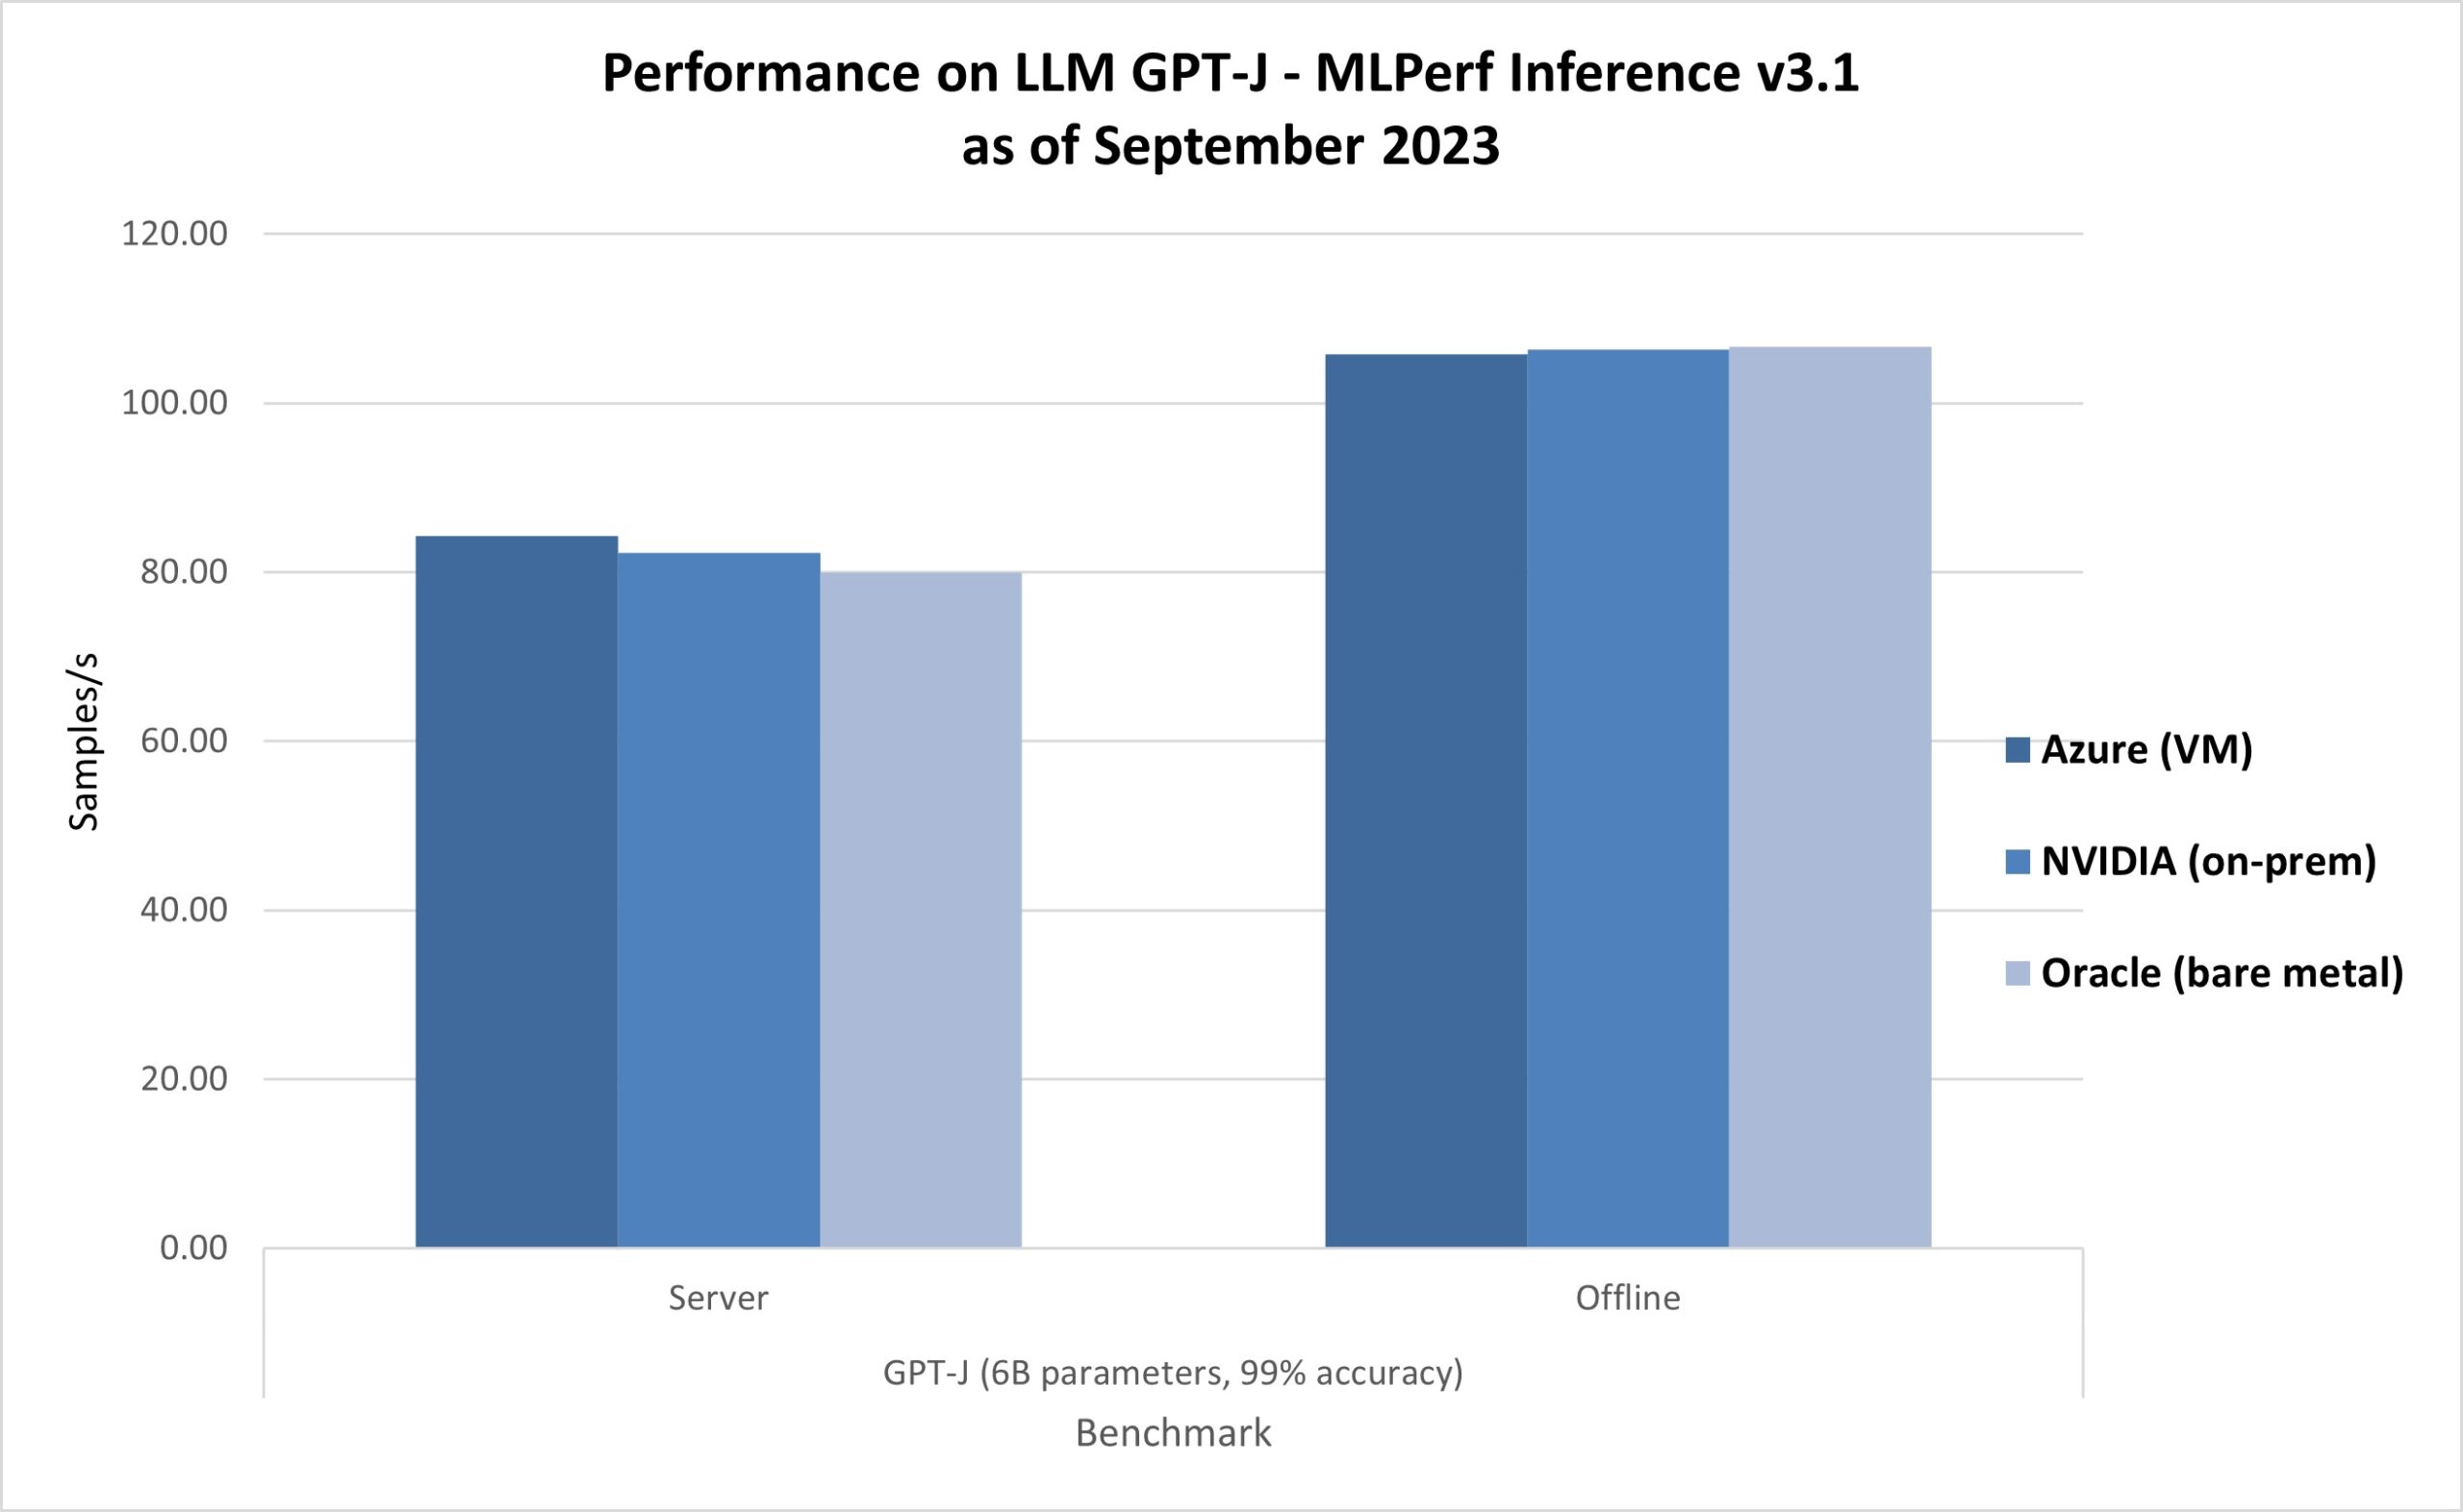 Performance of the ND H100 v5-series (3.1-0003) compared to on-premises and bare metal offerings of the same NVIDIA H100 Tensor Core GPUs (3.1-0107 and 3.1-0121). All the results were obtained with the GPT-J benchmark from MLPerf Inference v3.1, scenarios: Offline and Server, accuracy: 99 percent.